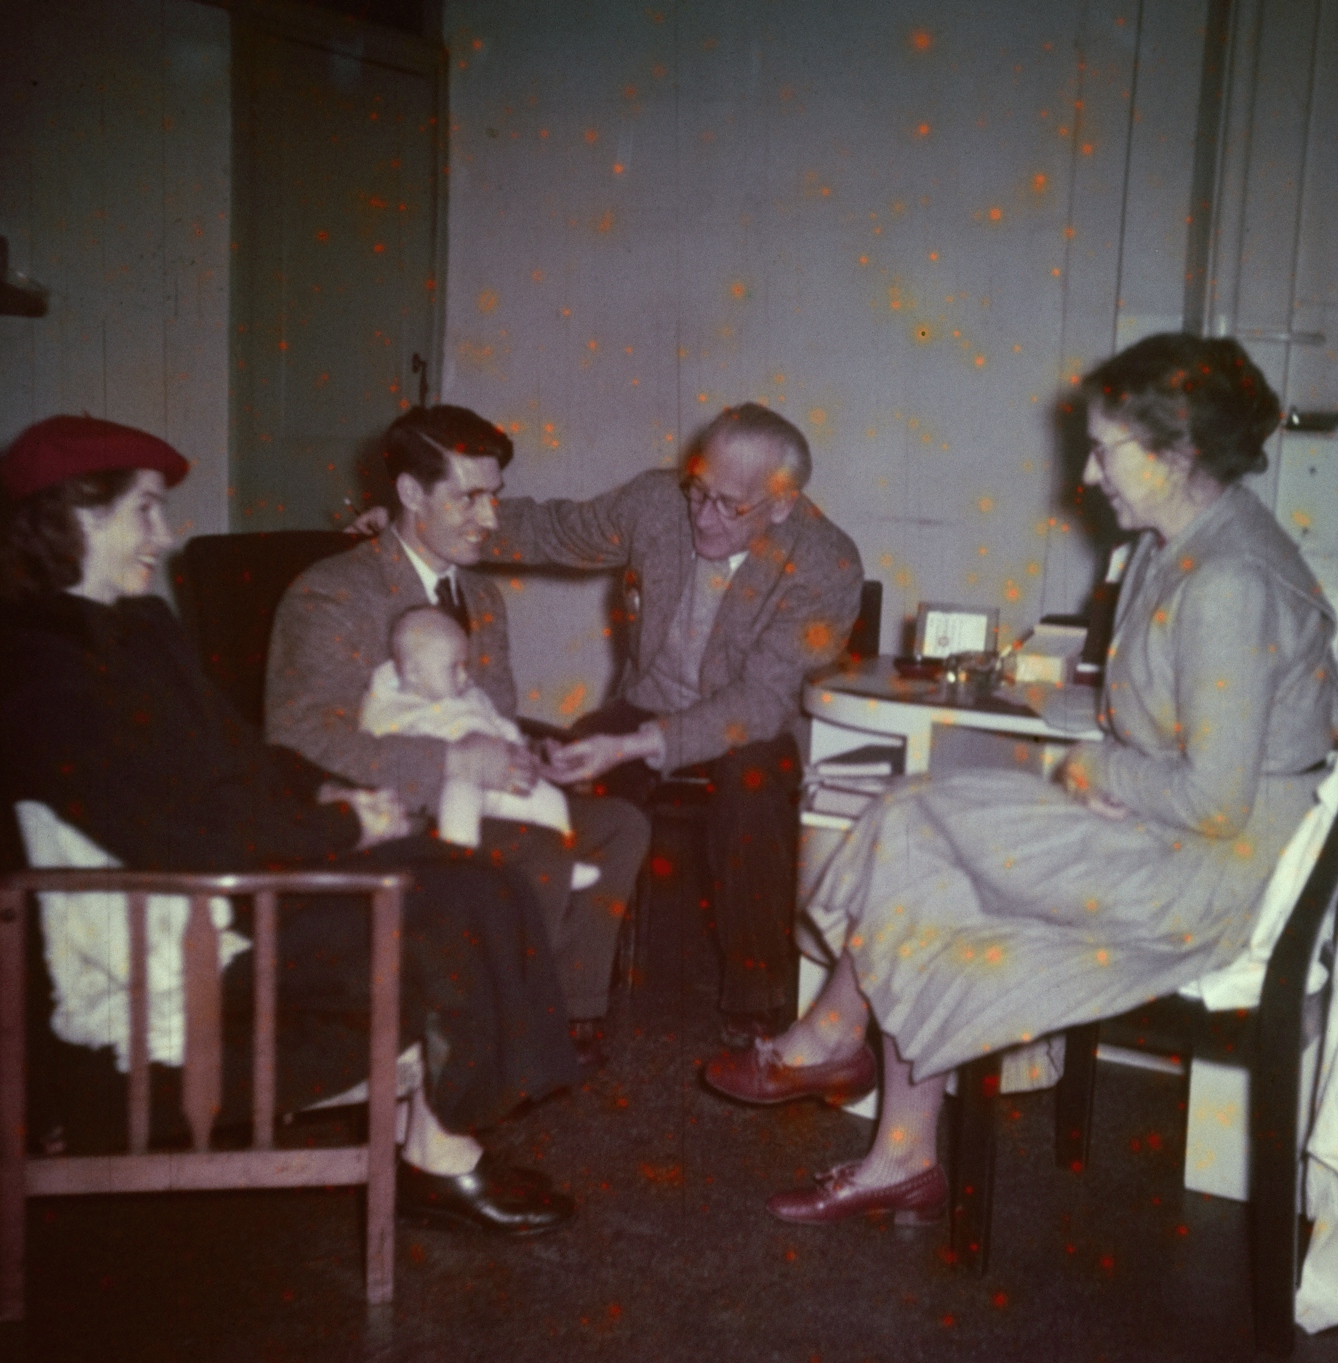 Photograph from the mid-20th Century Peckham Pioneer Centre, showing a man and woman seated on the left, the woman wearing a bright red beret and the man holding a baby on his lap. An older man reaches across towards the hand of the baby, and an older woman sits at a desk with her legs crossed, smiling at the group.